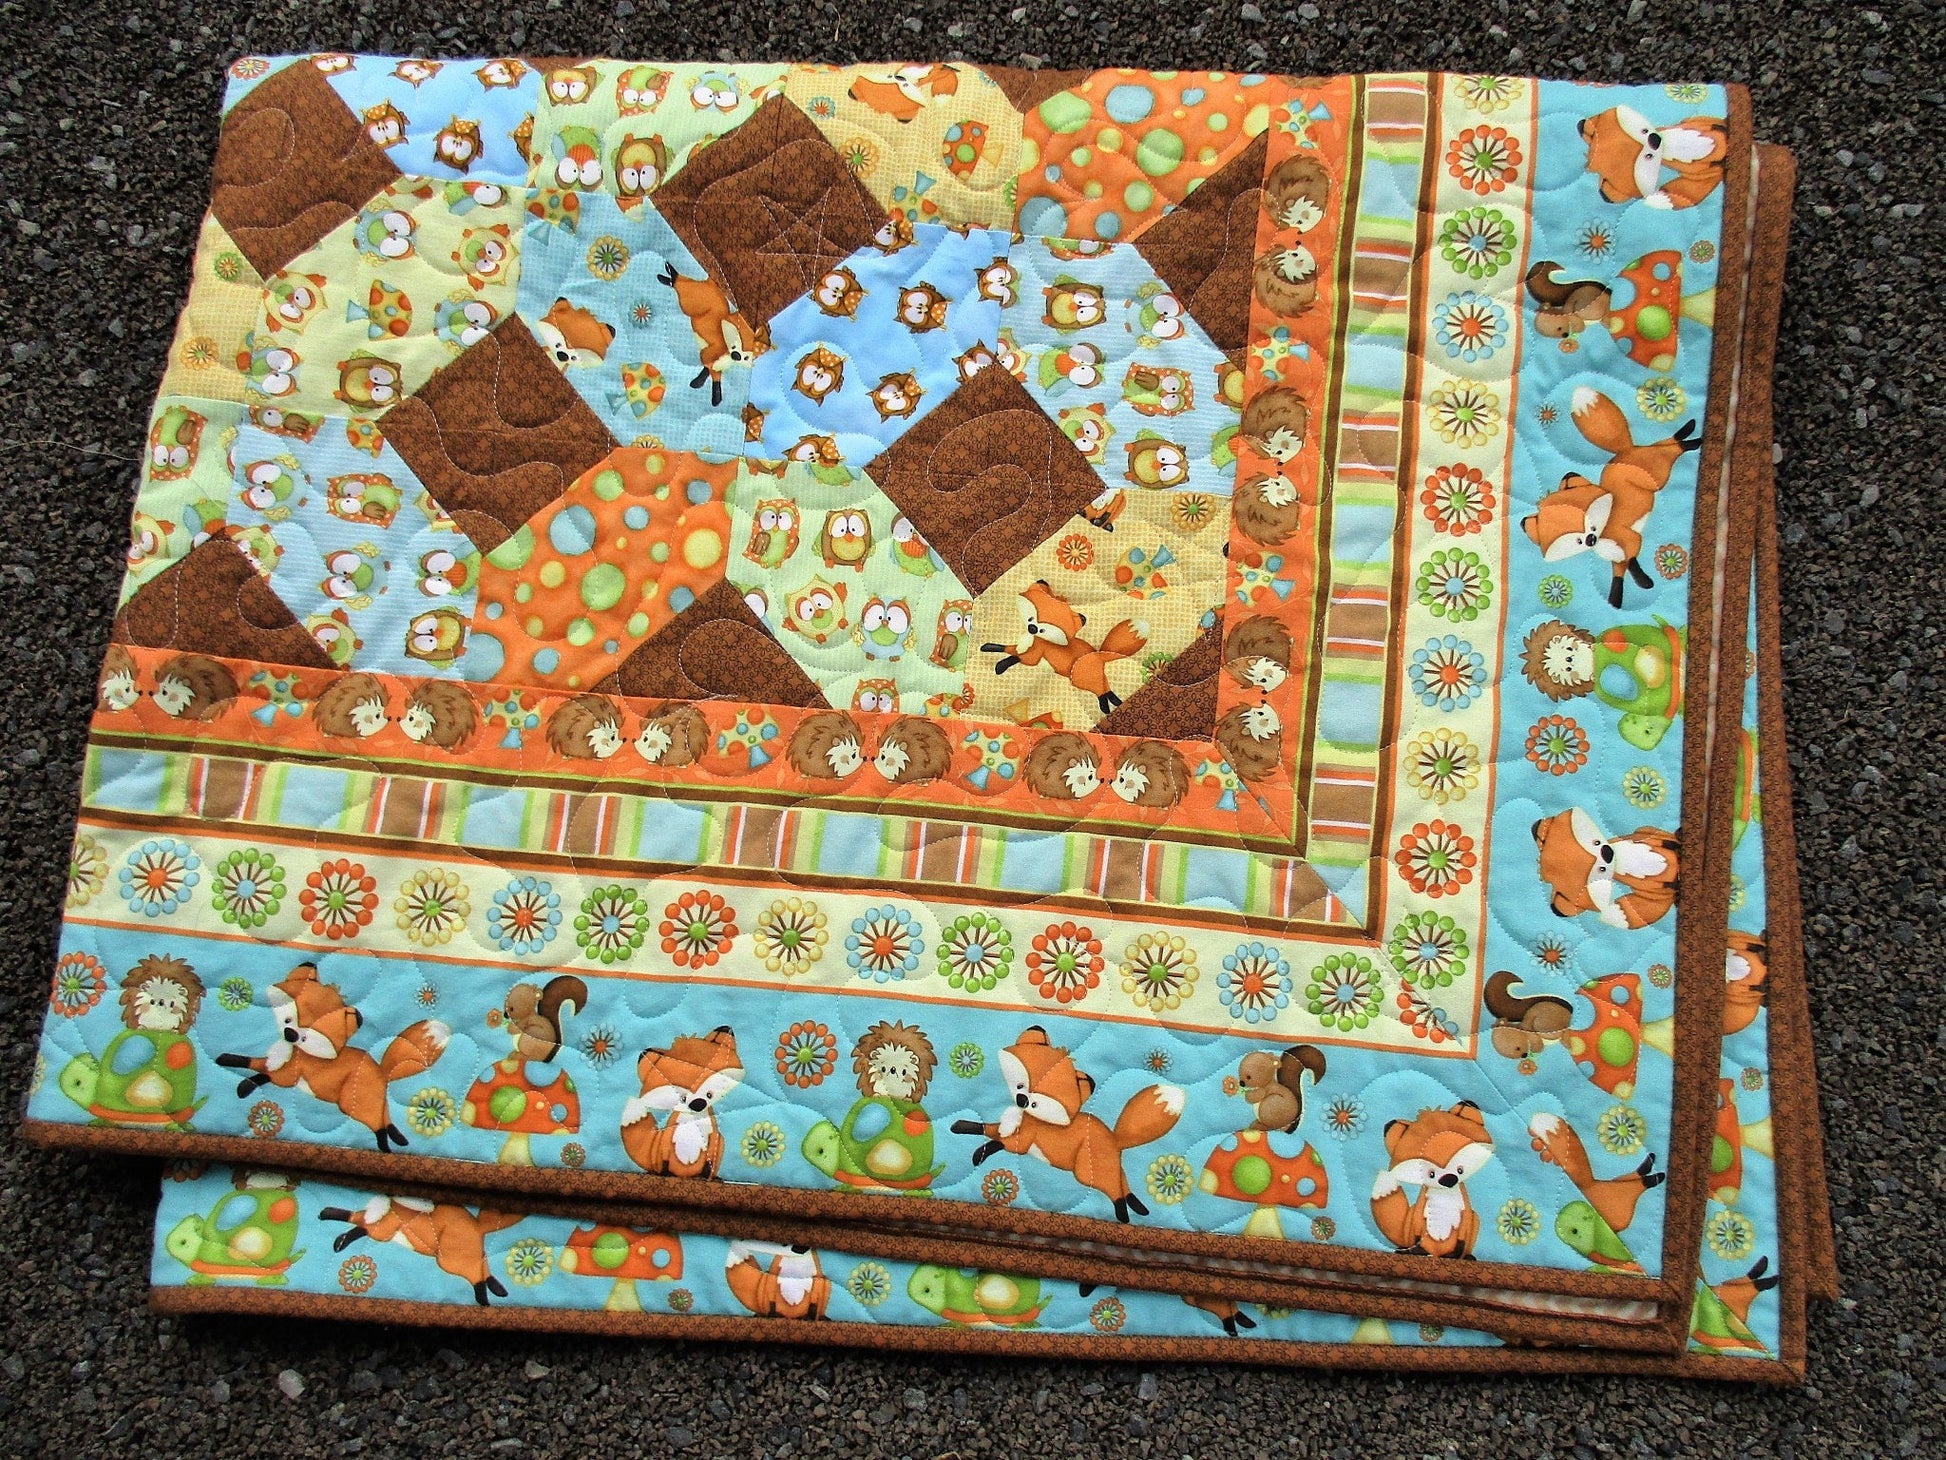 the folded quilt showing the mitred corners on the outer border which creates a nice framing effect.